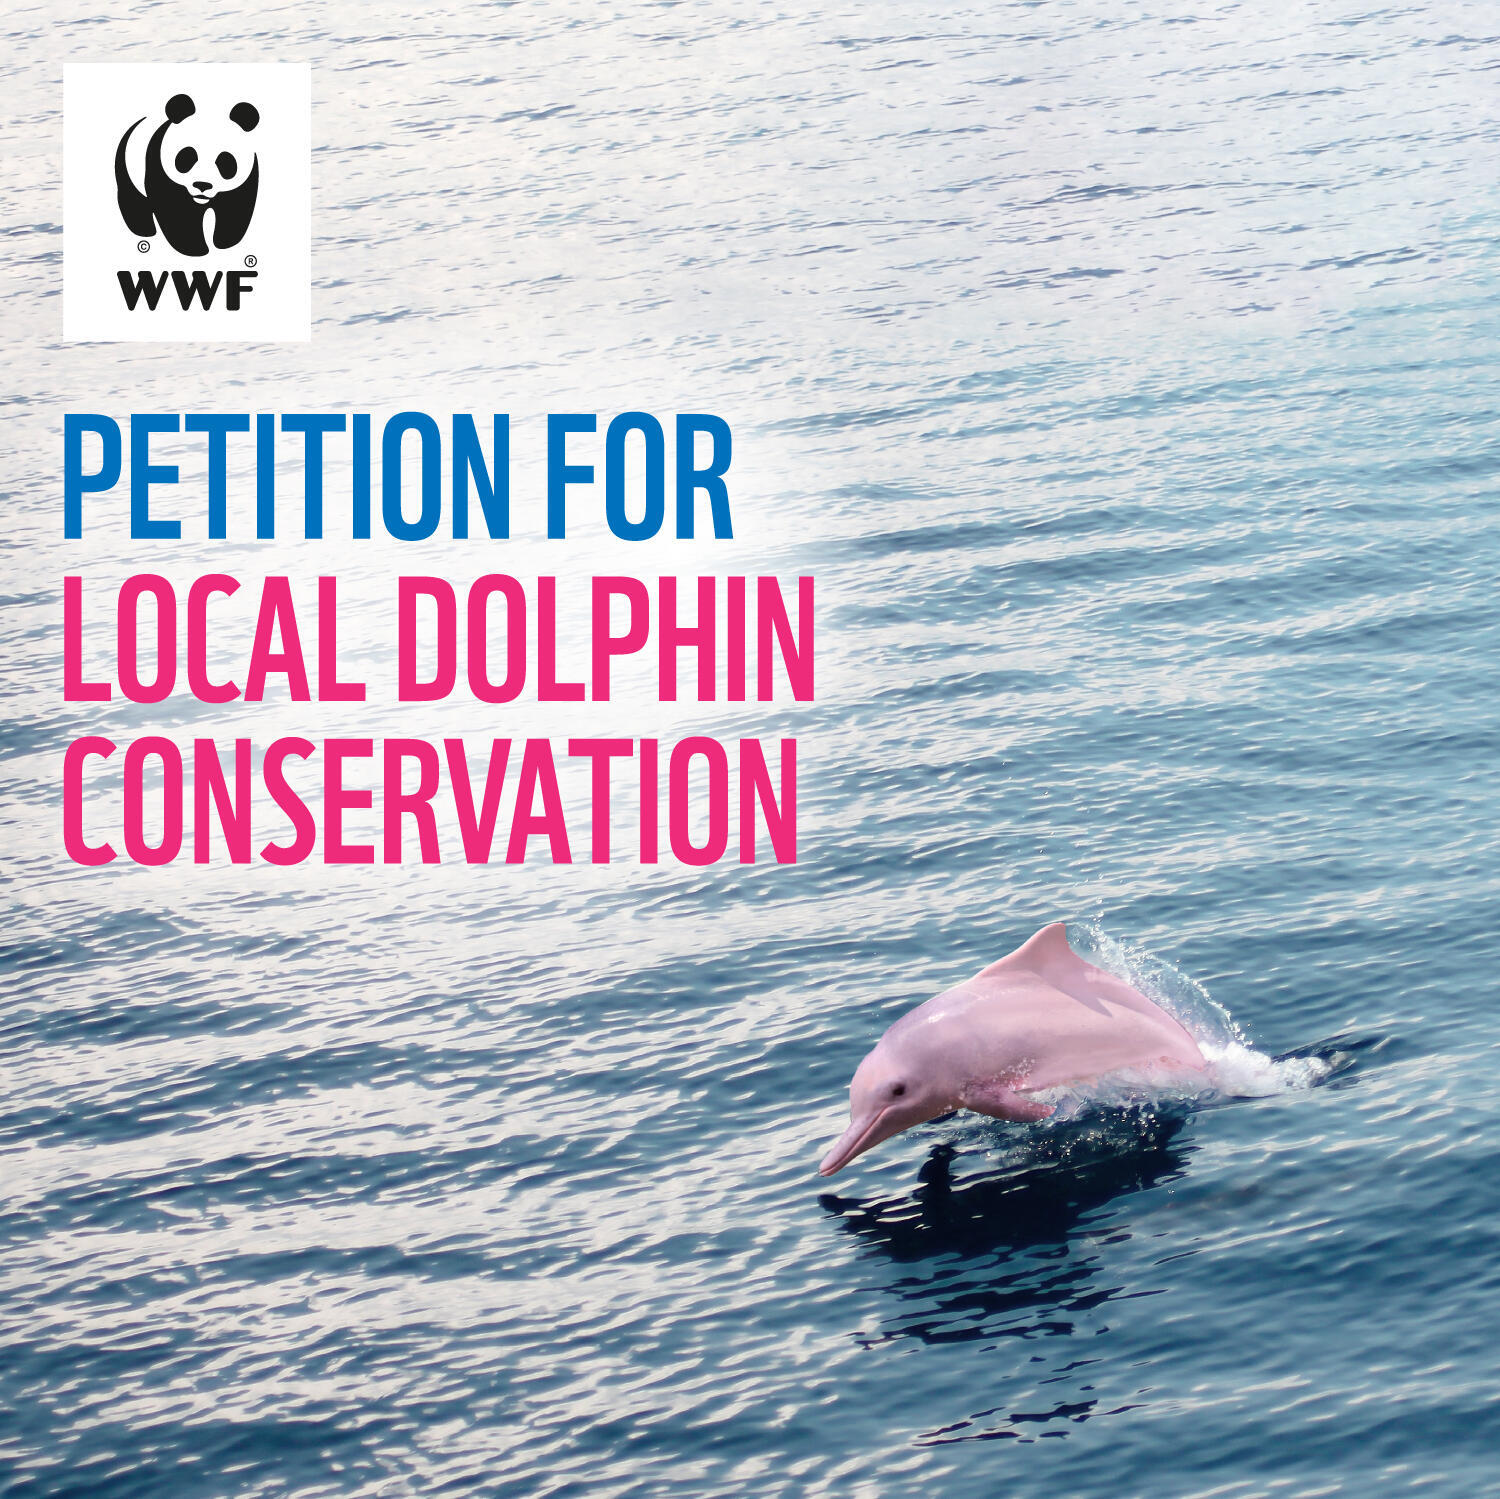 Chinese White Dolphin Petition